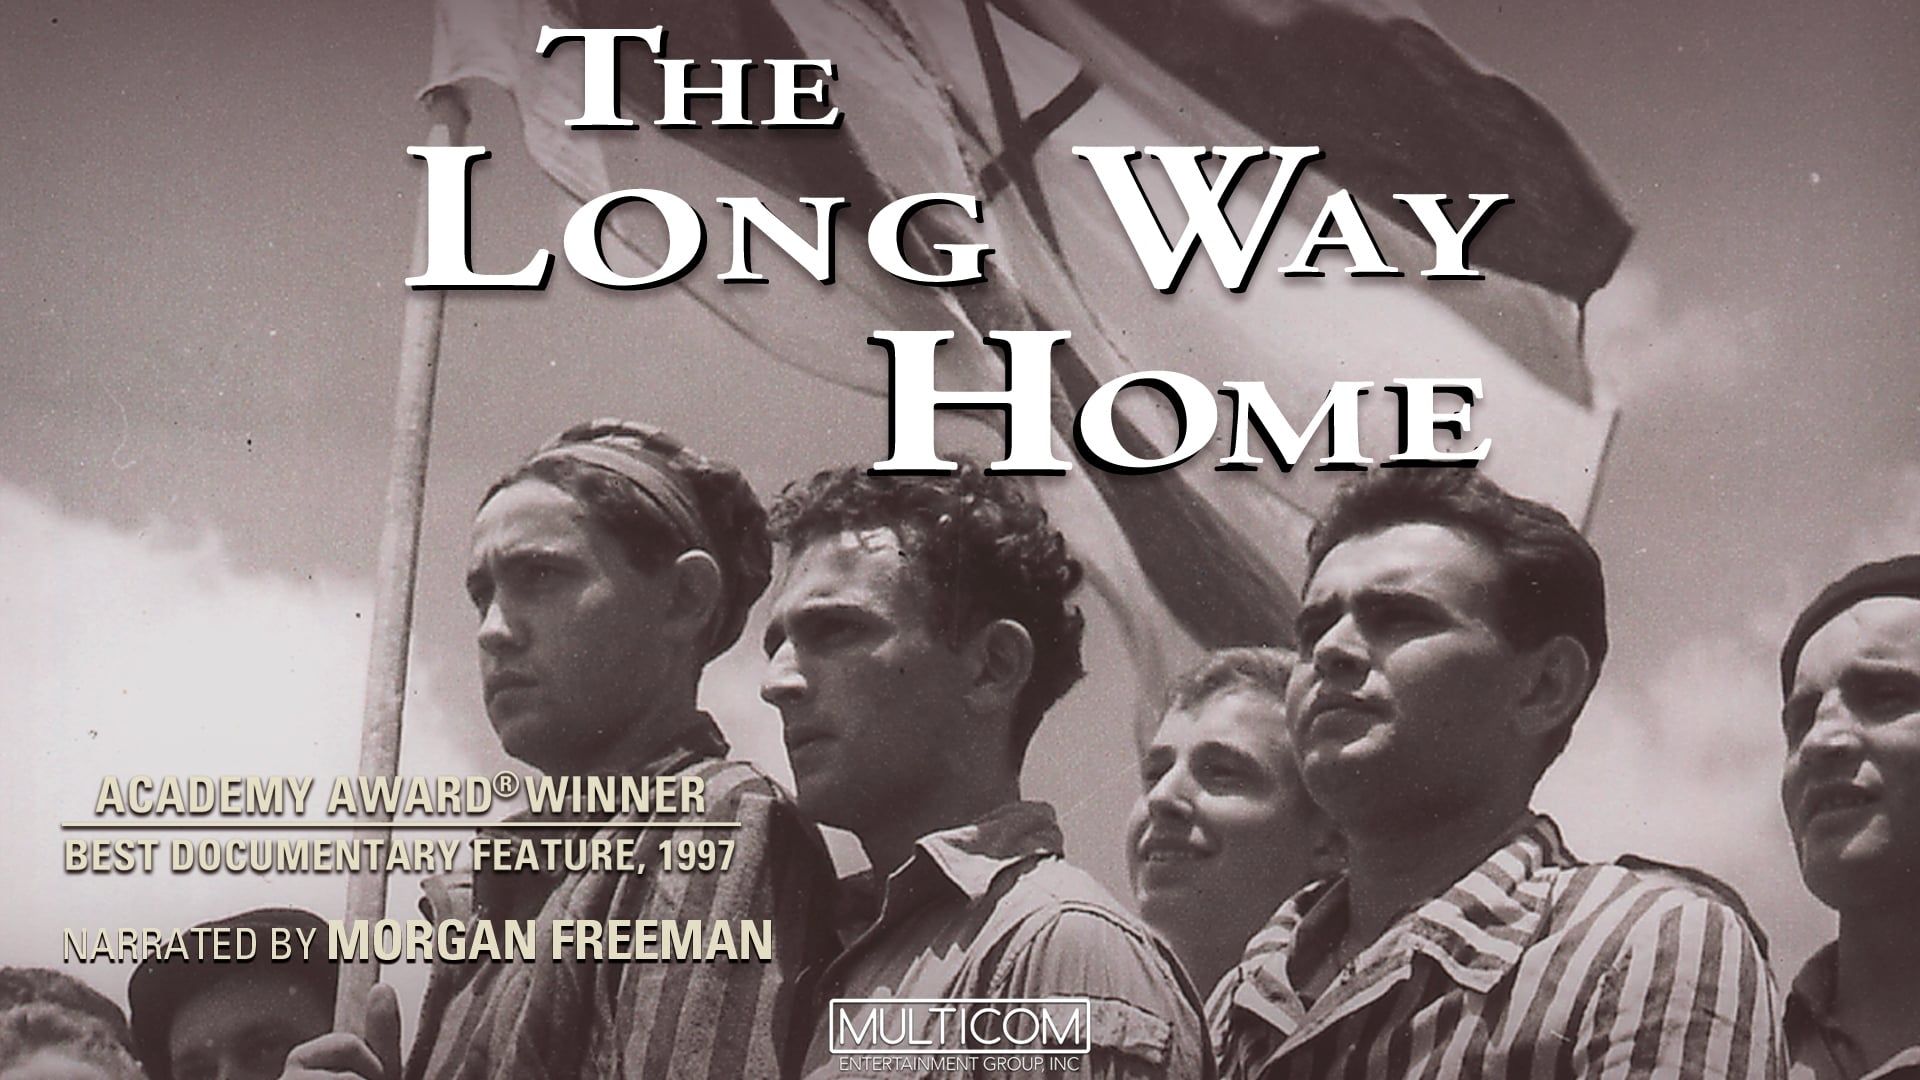 The Long Way Home background